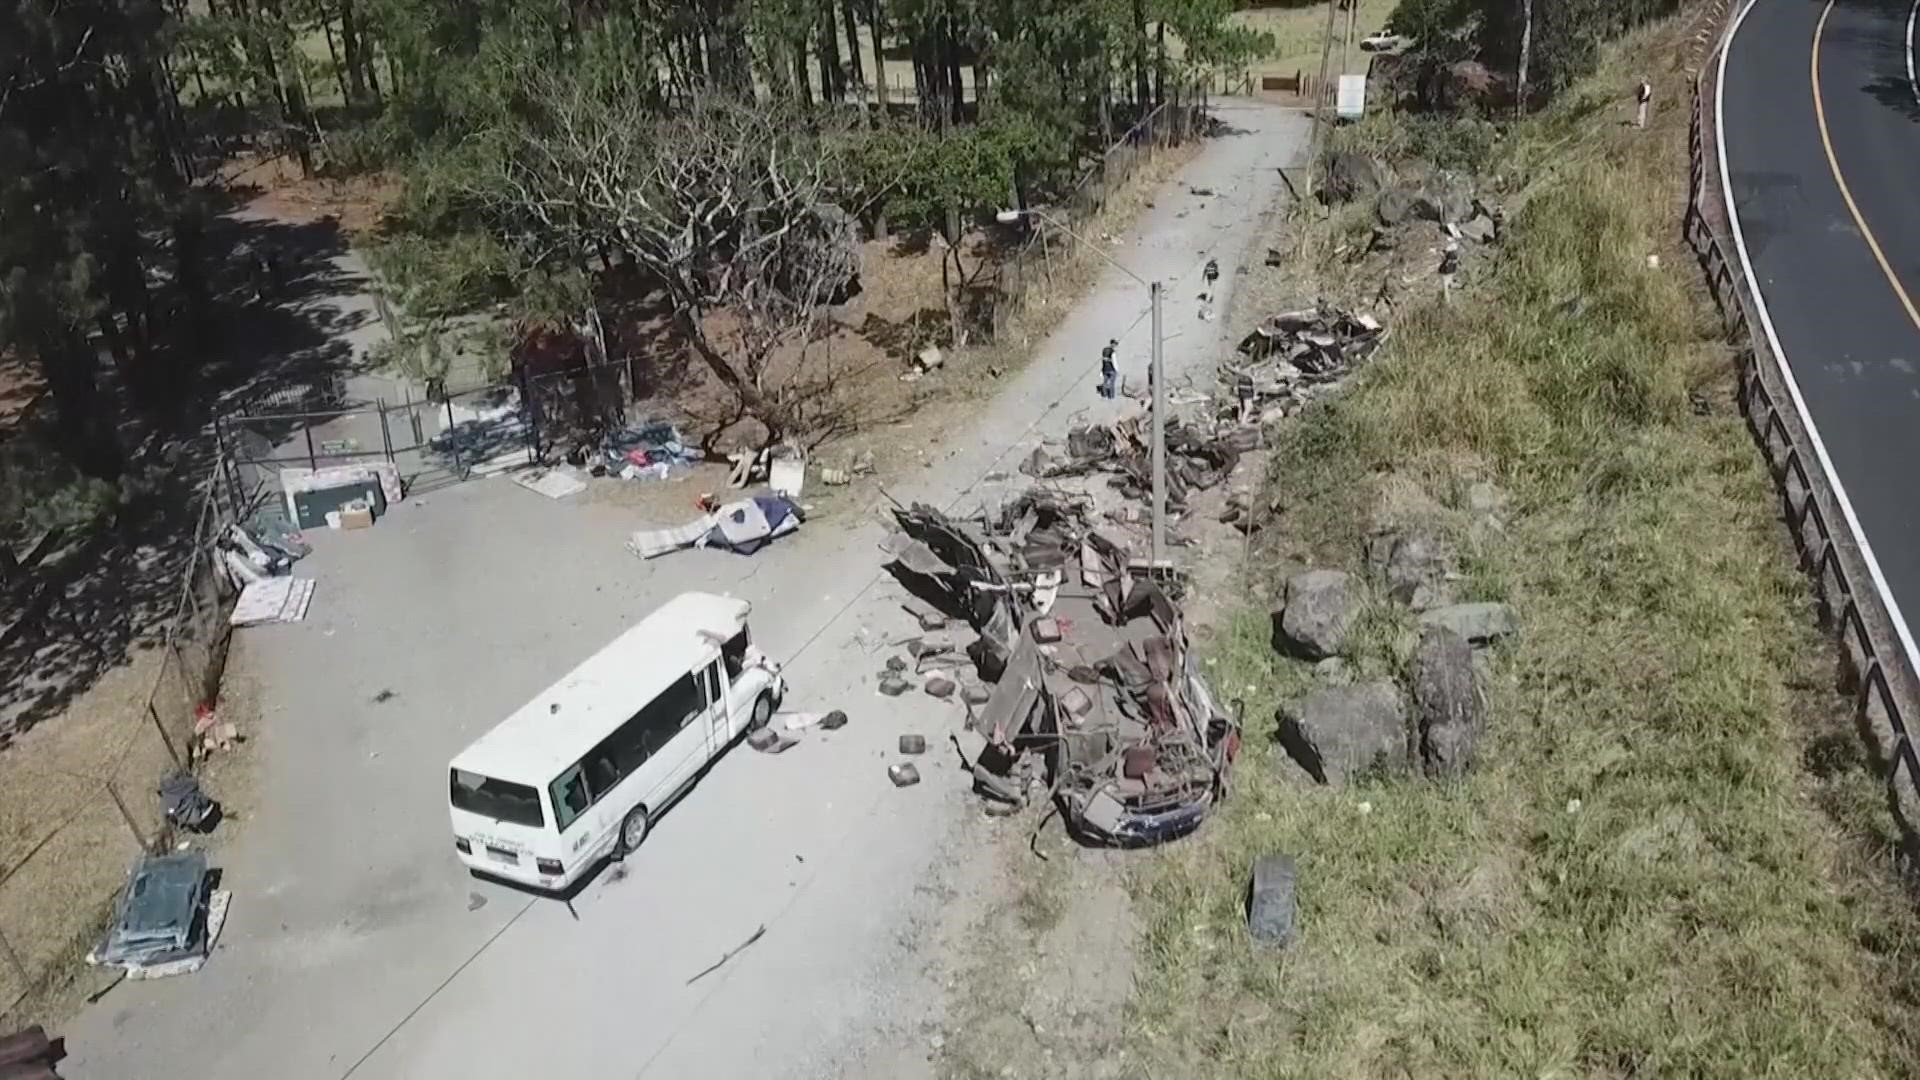 Thirty-nine migrants died when a bus driver tried to turn around and accidentally drove off a cliff in Panama. One family on the bus was headed to Denver.